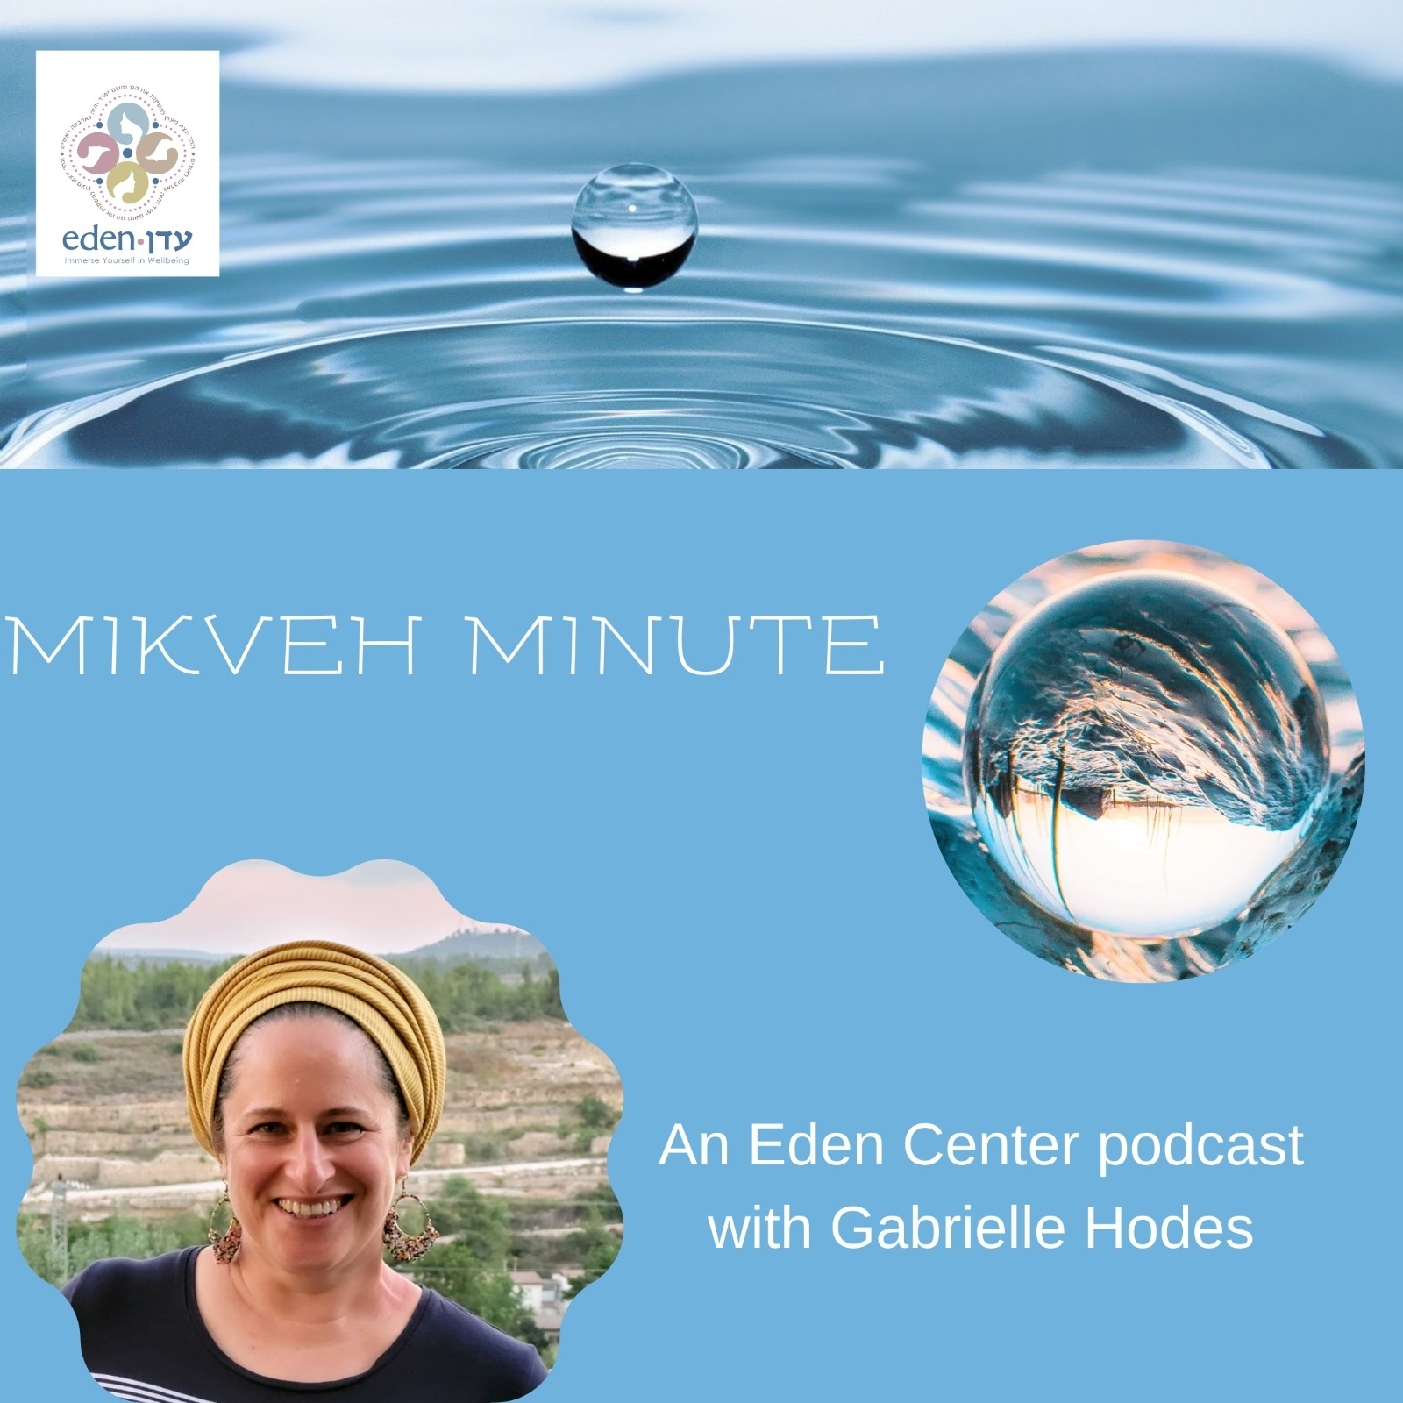 Vacationing Far From a Mikveh? We Got You Covered